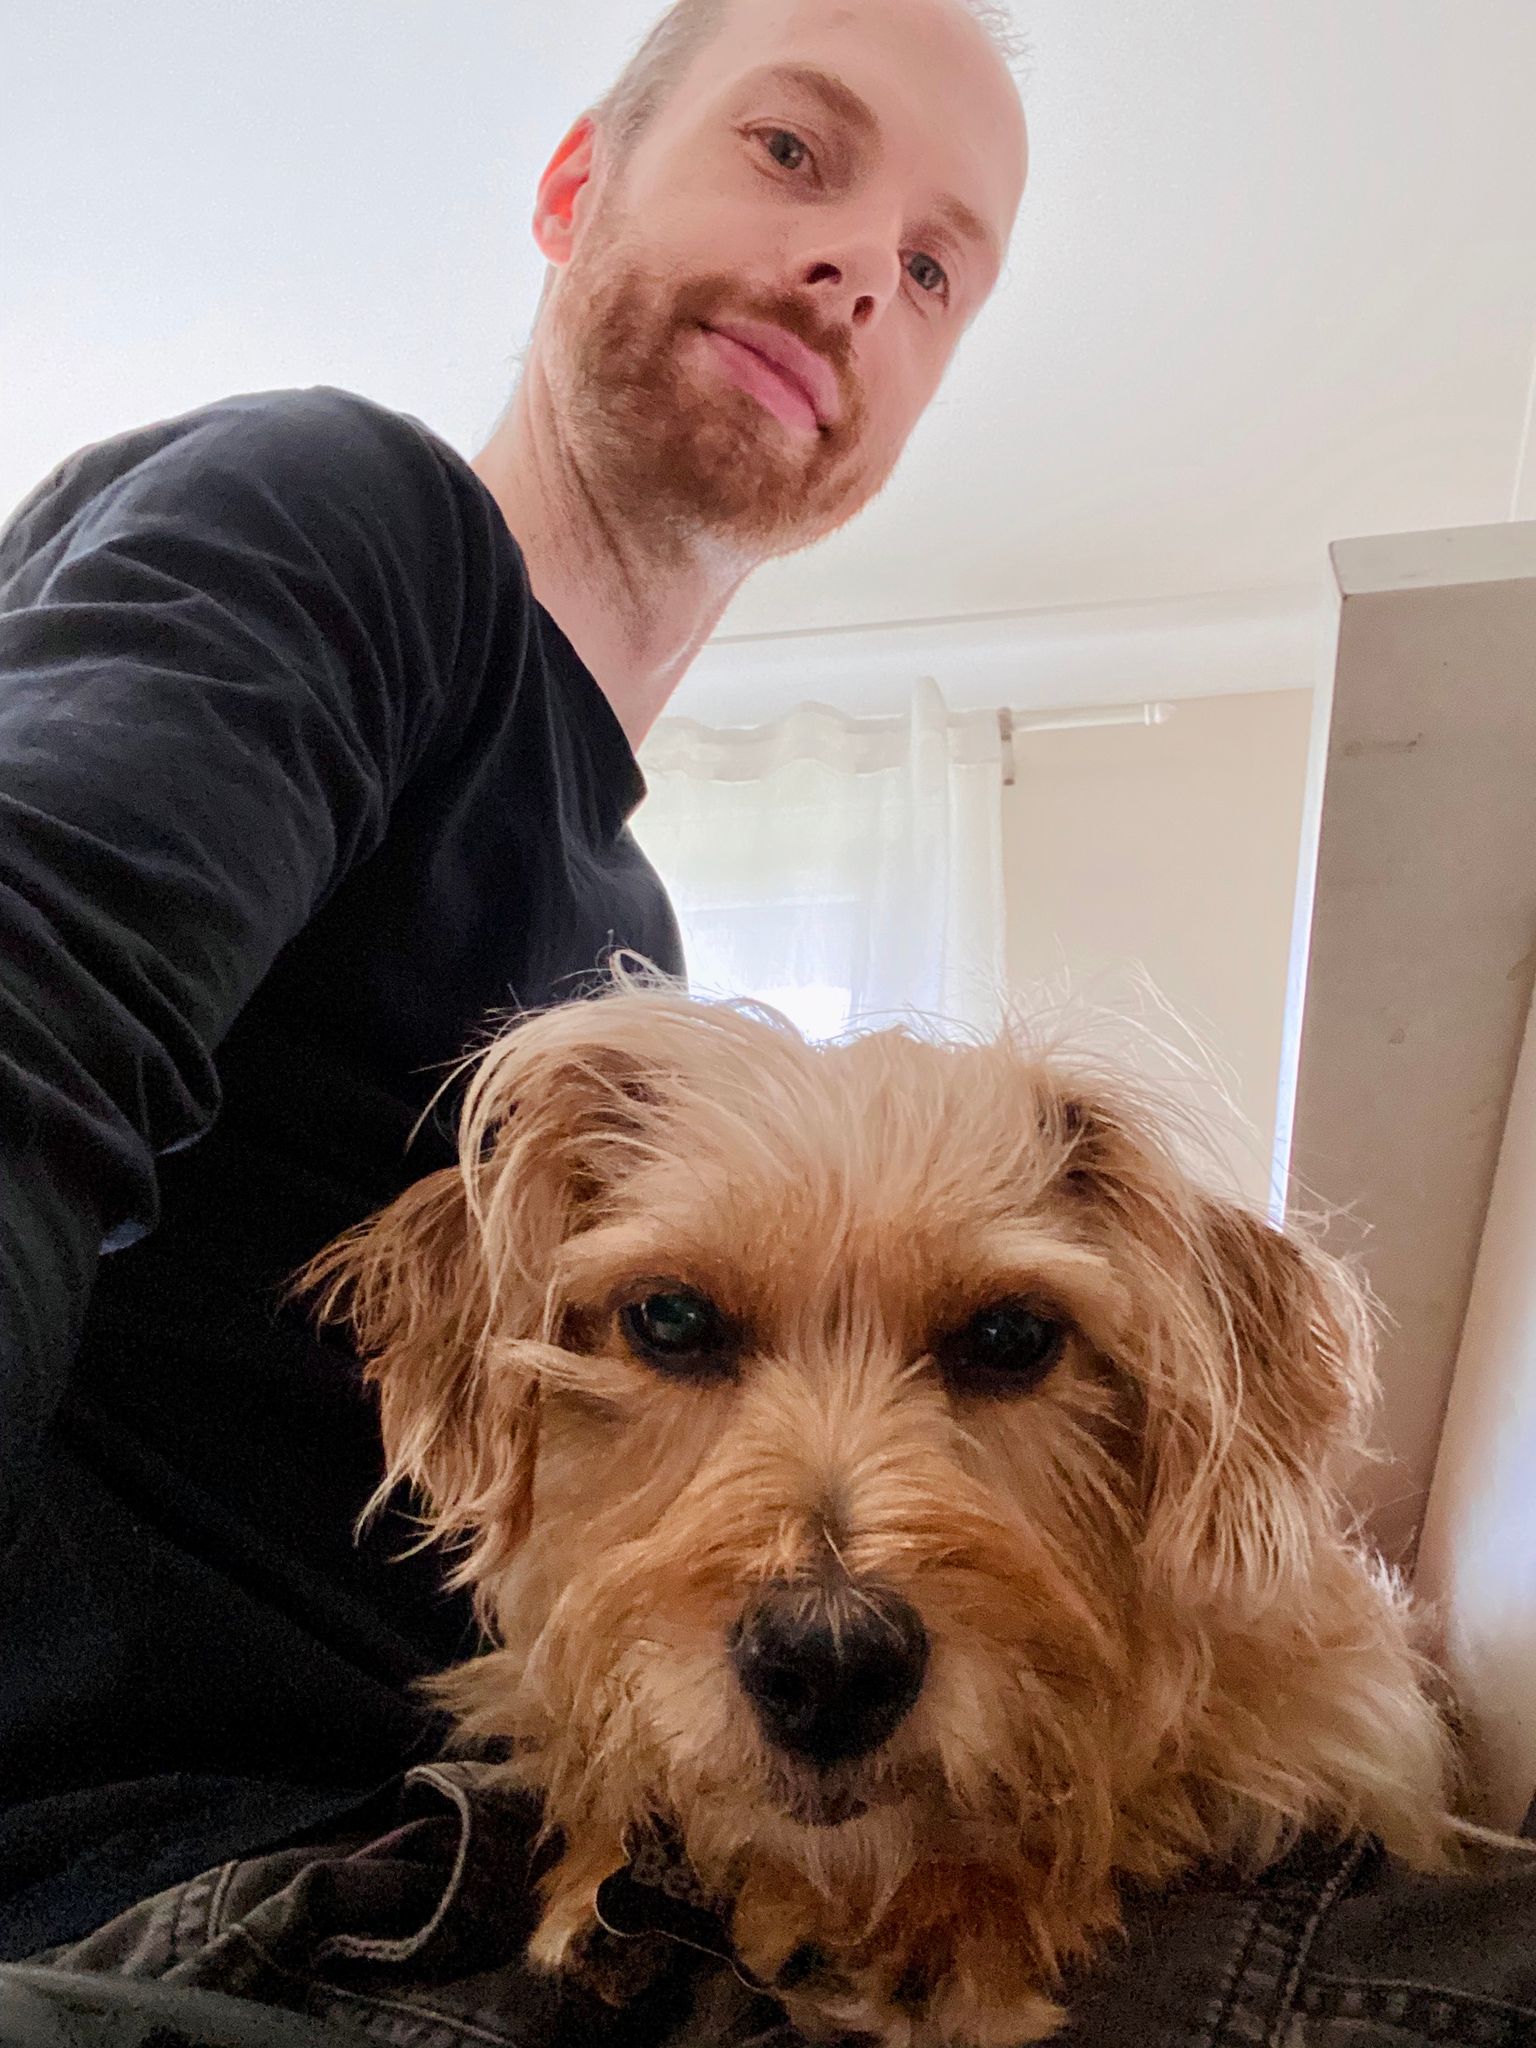 A photo of the same dog but taken with the front camera from a low angle beside me, showing him looking all dishevelled, and me, a white man with a closely-shaven red beard, both looking at the camera.